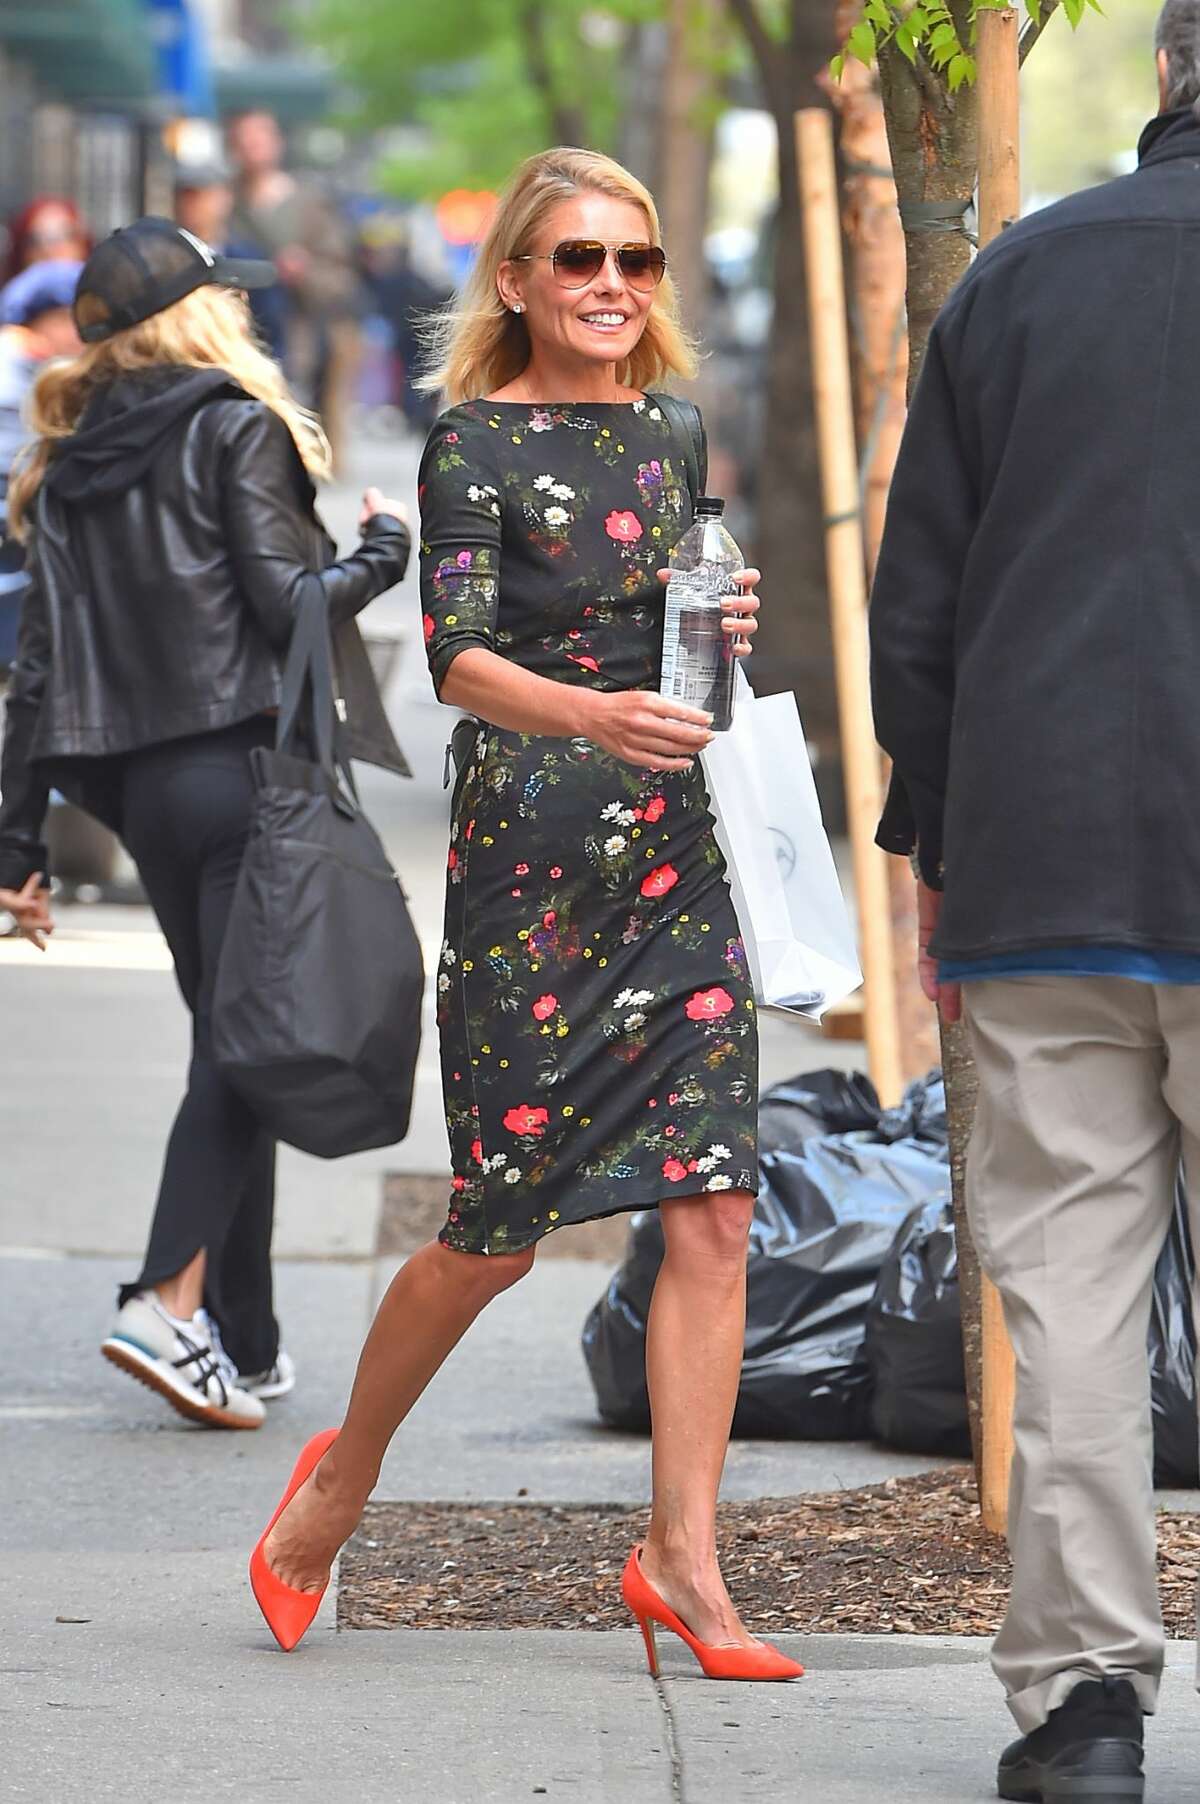 NEW YORK - APRIL 26: Kelly Ripa seen leaving her Upper East Side gym, after her first day back on the 'Live with Kelly and Michael' show on April 26, 2016 in New York, New York. (Photo by Josiah Kamau/BuzzFoto via Getty Images)